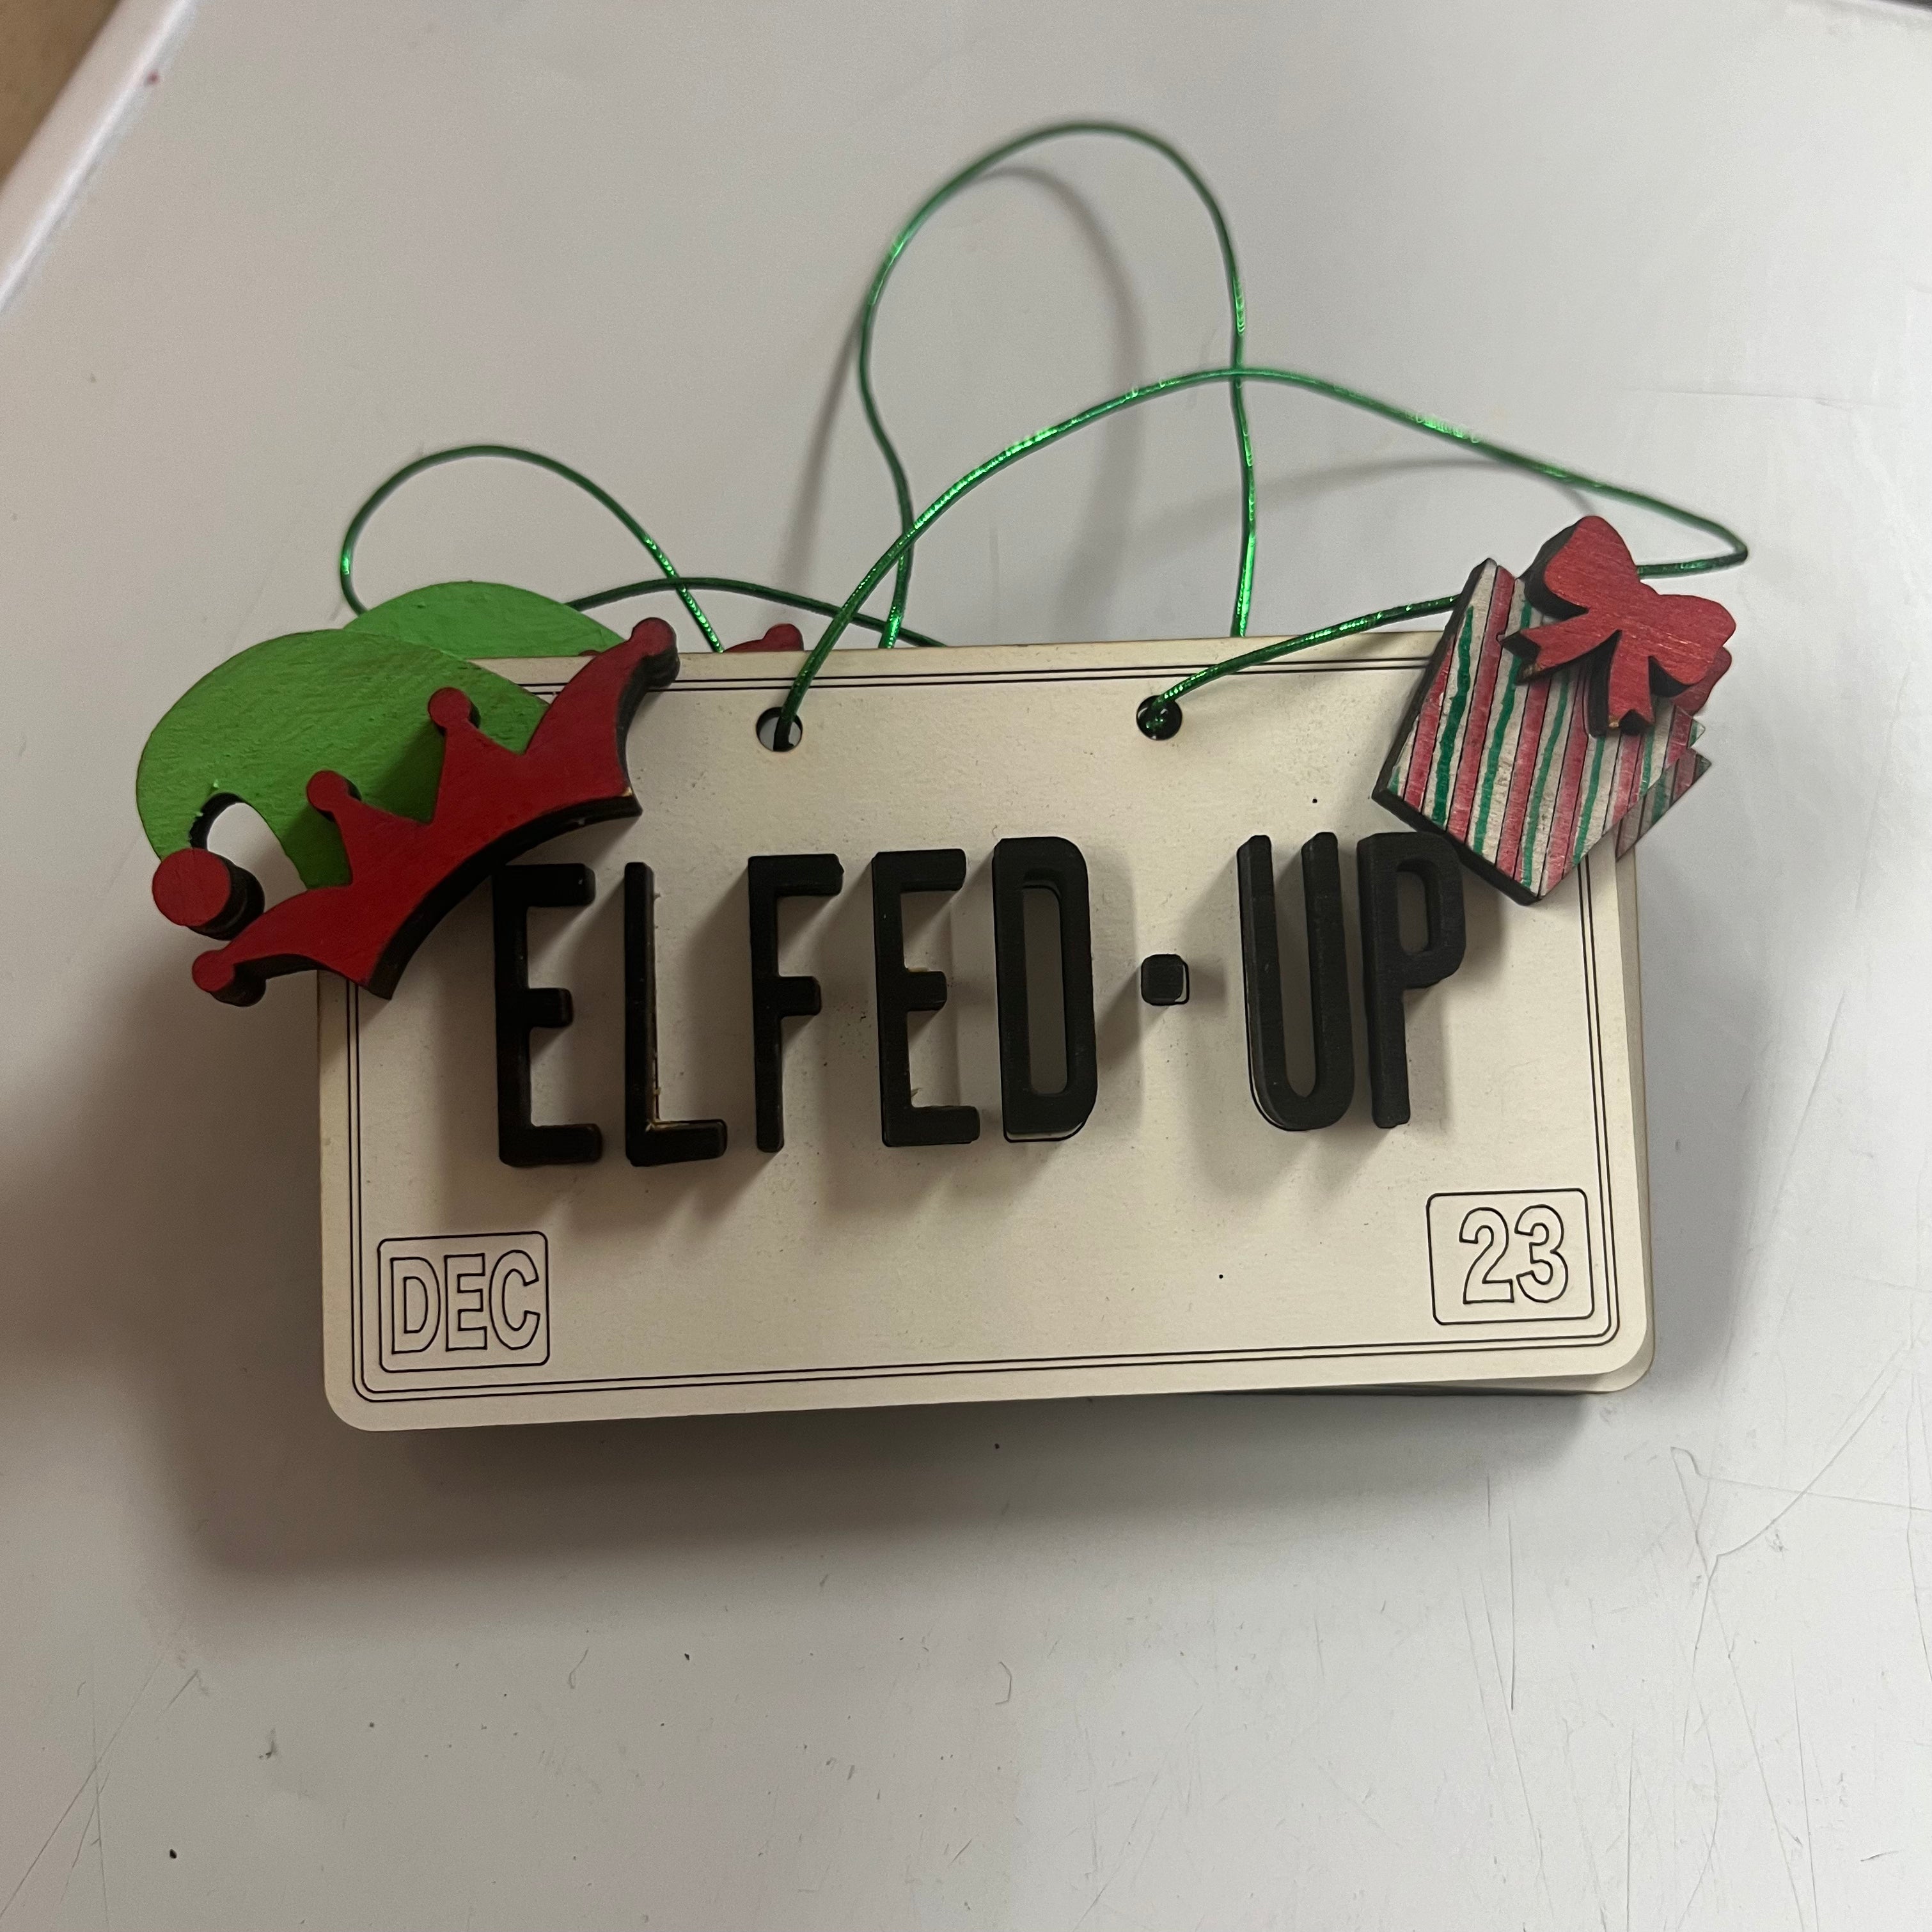 Elfed-up Ornament